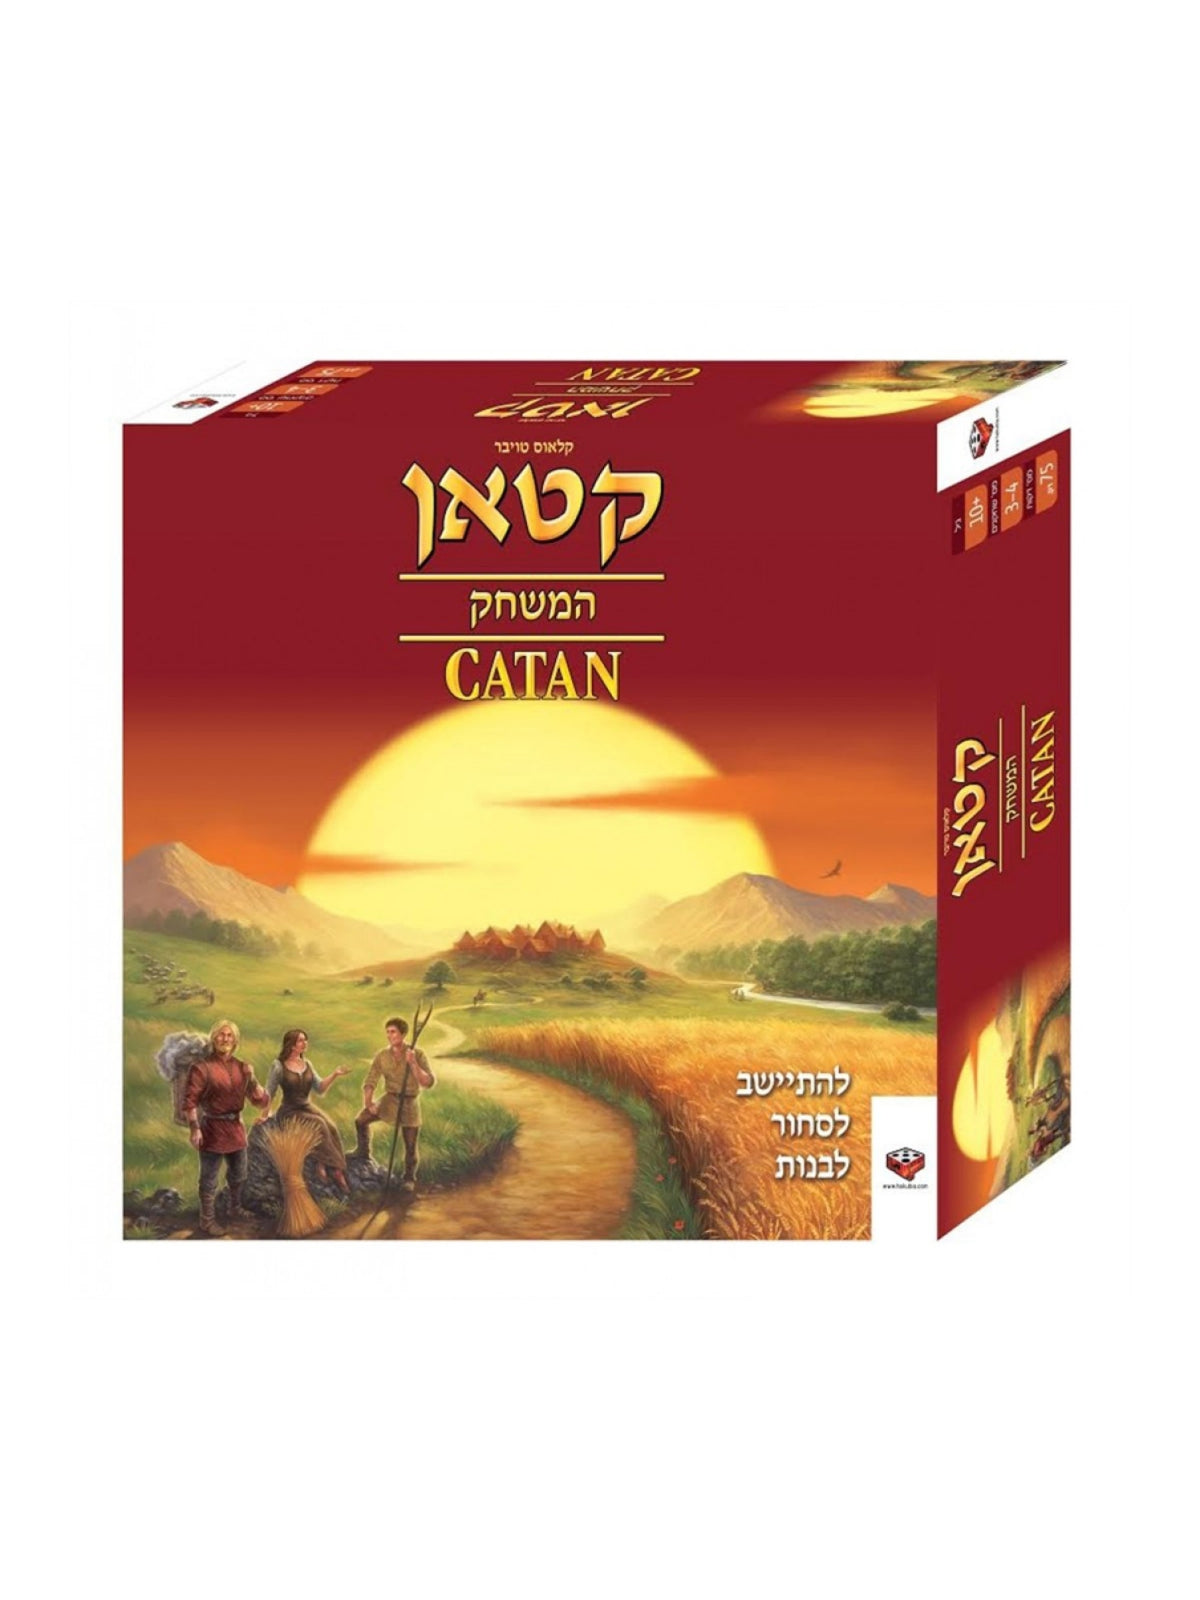 SETTLERS OF CATAN IS A BOARD GAME